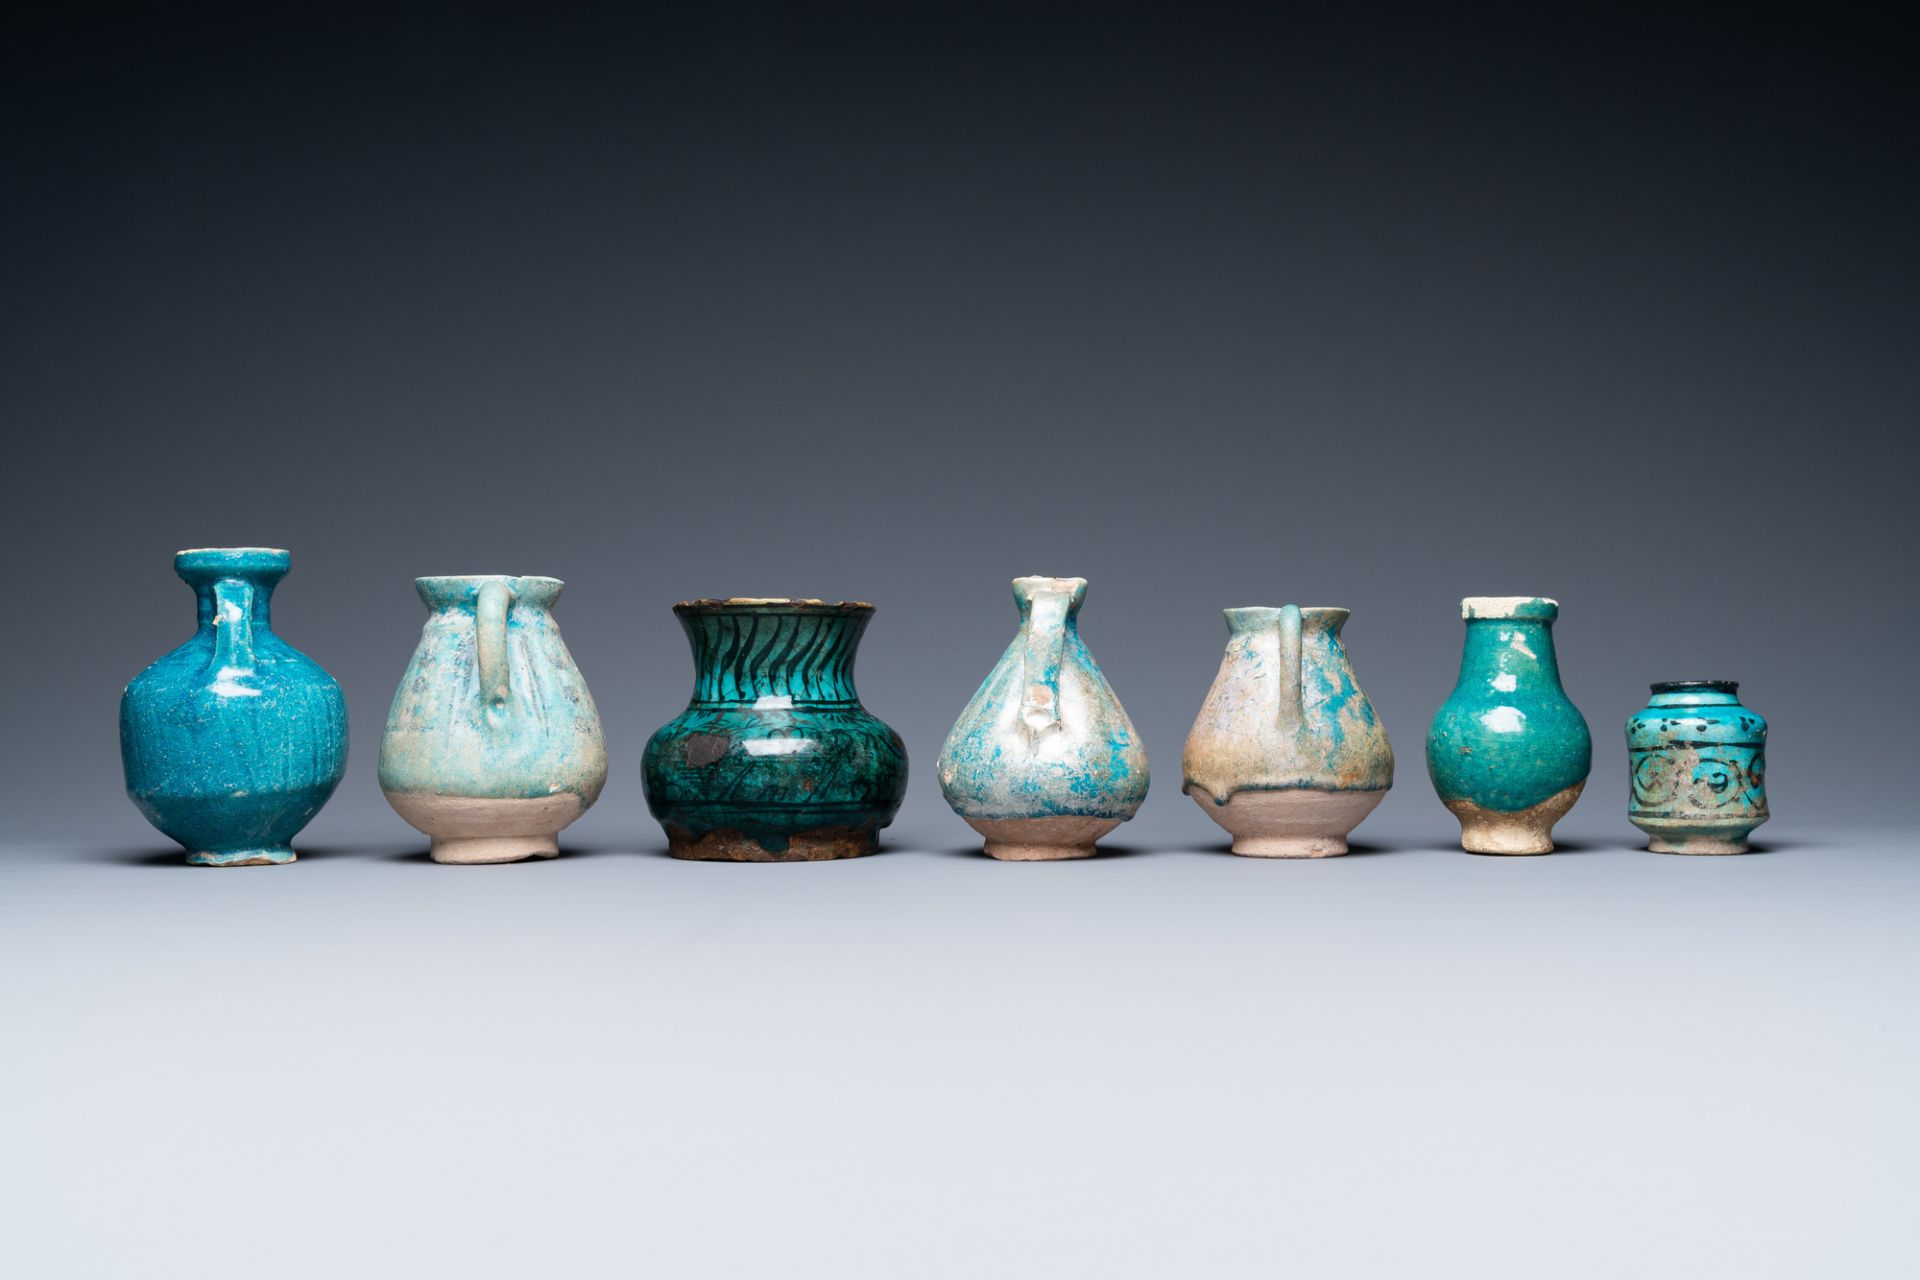 A collection of seven turquoise-glazed jugs and vases, Middle-East, 13th C. and later - Image 5 of 7